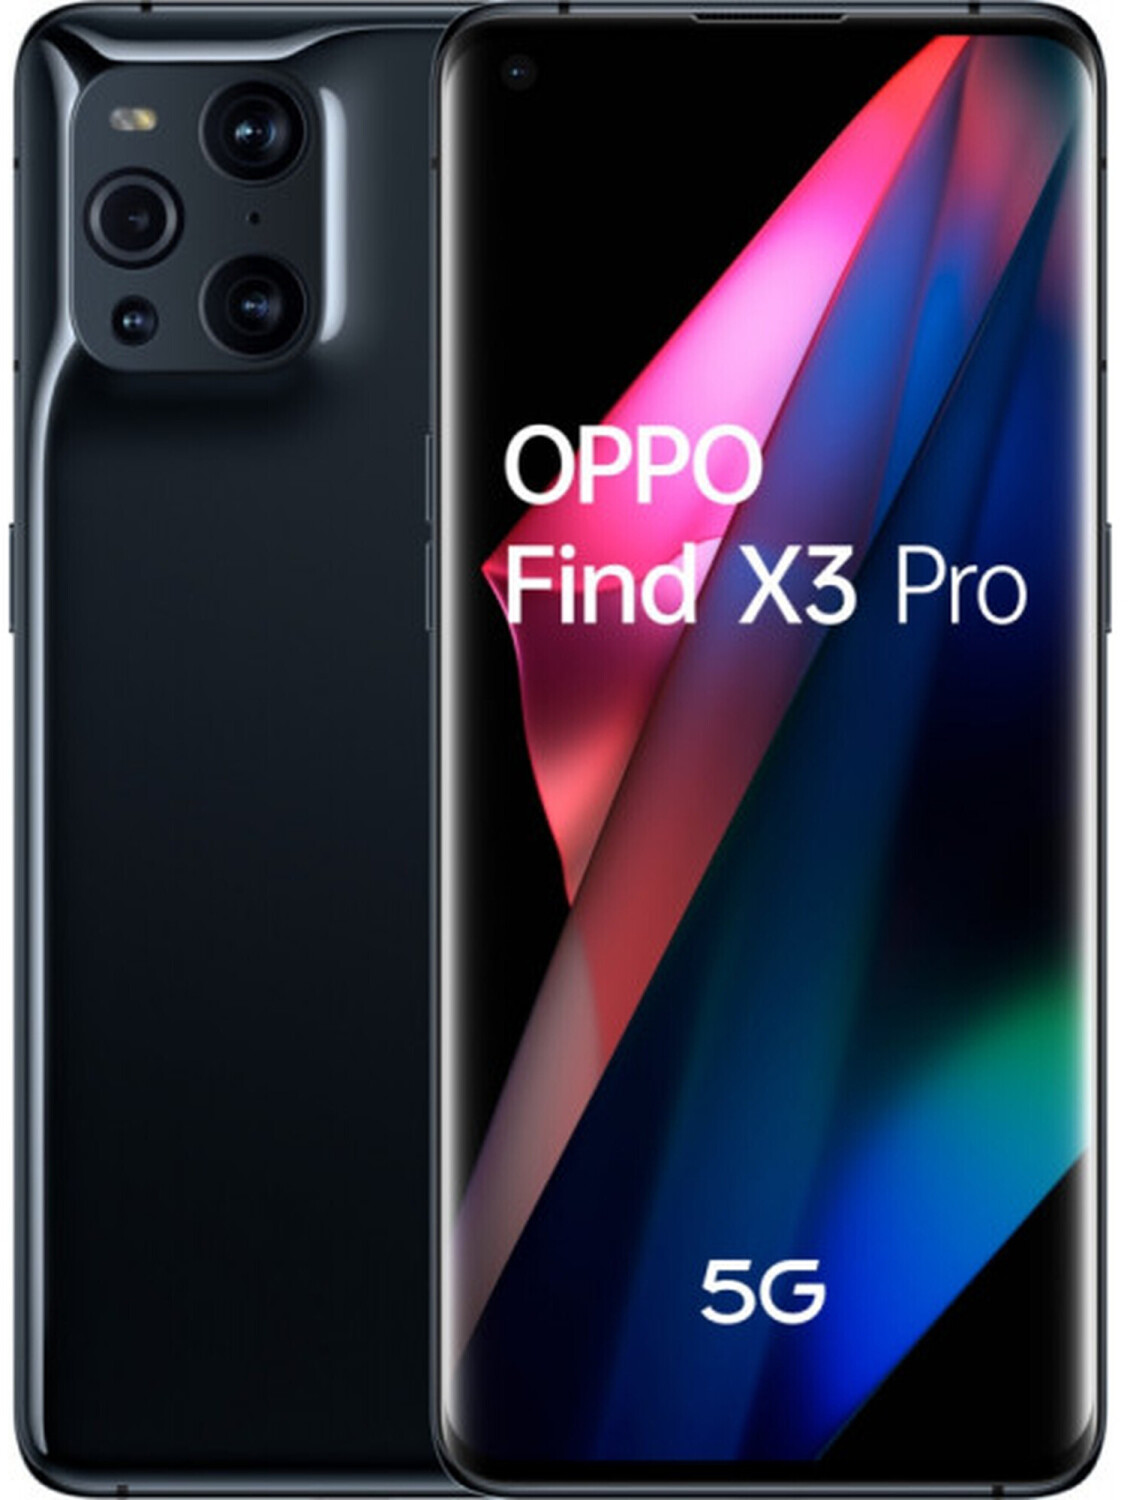 ᐅ refurbed™ Oppo Find X3 Pro from €723 | Now with a 30 Day Trial Period